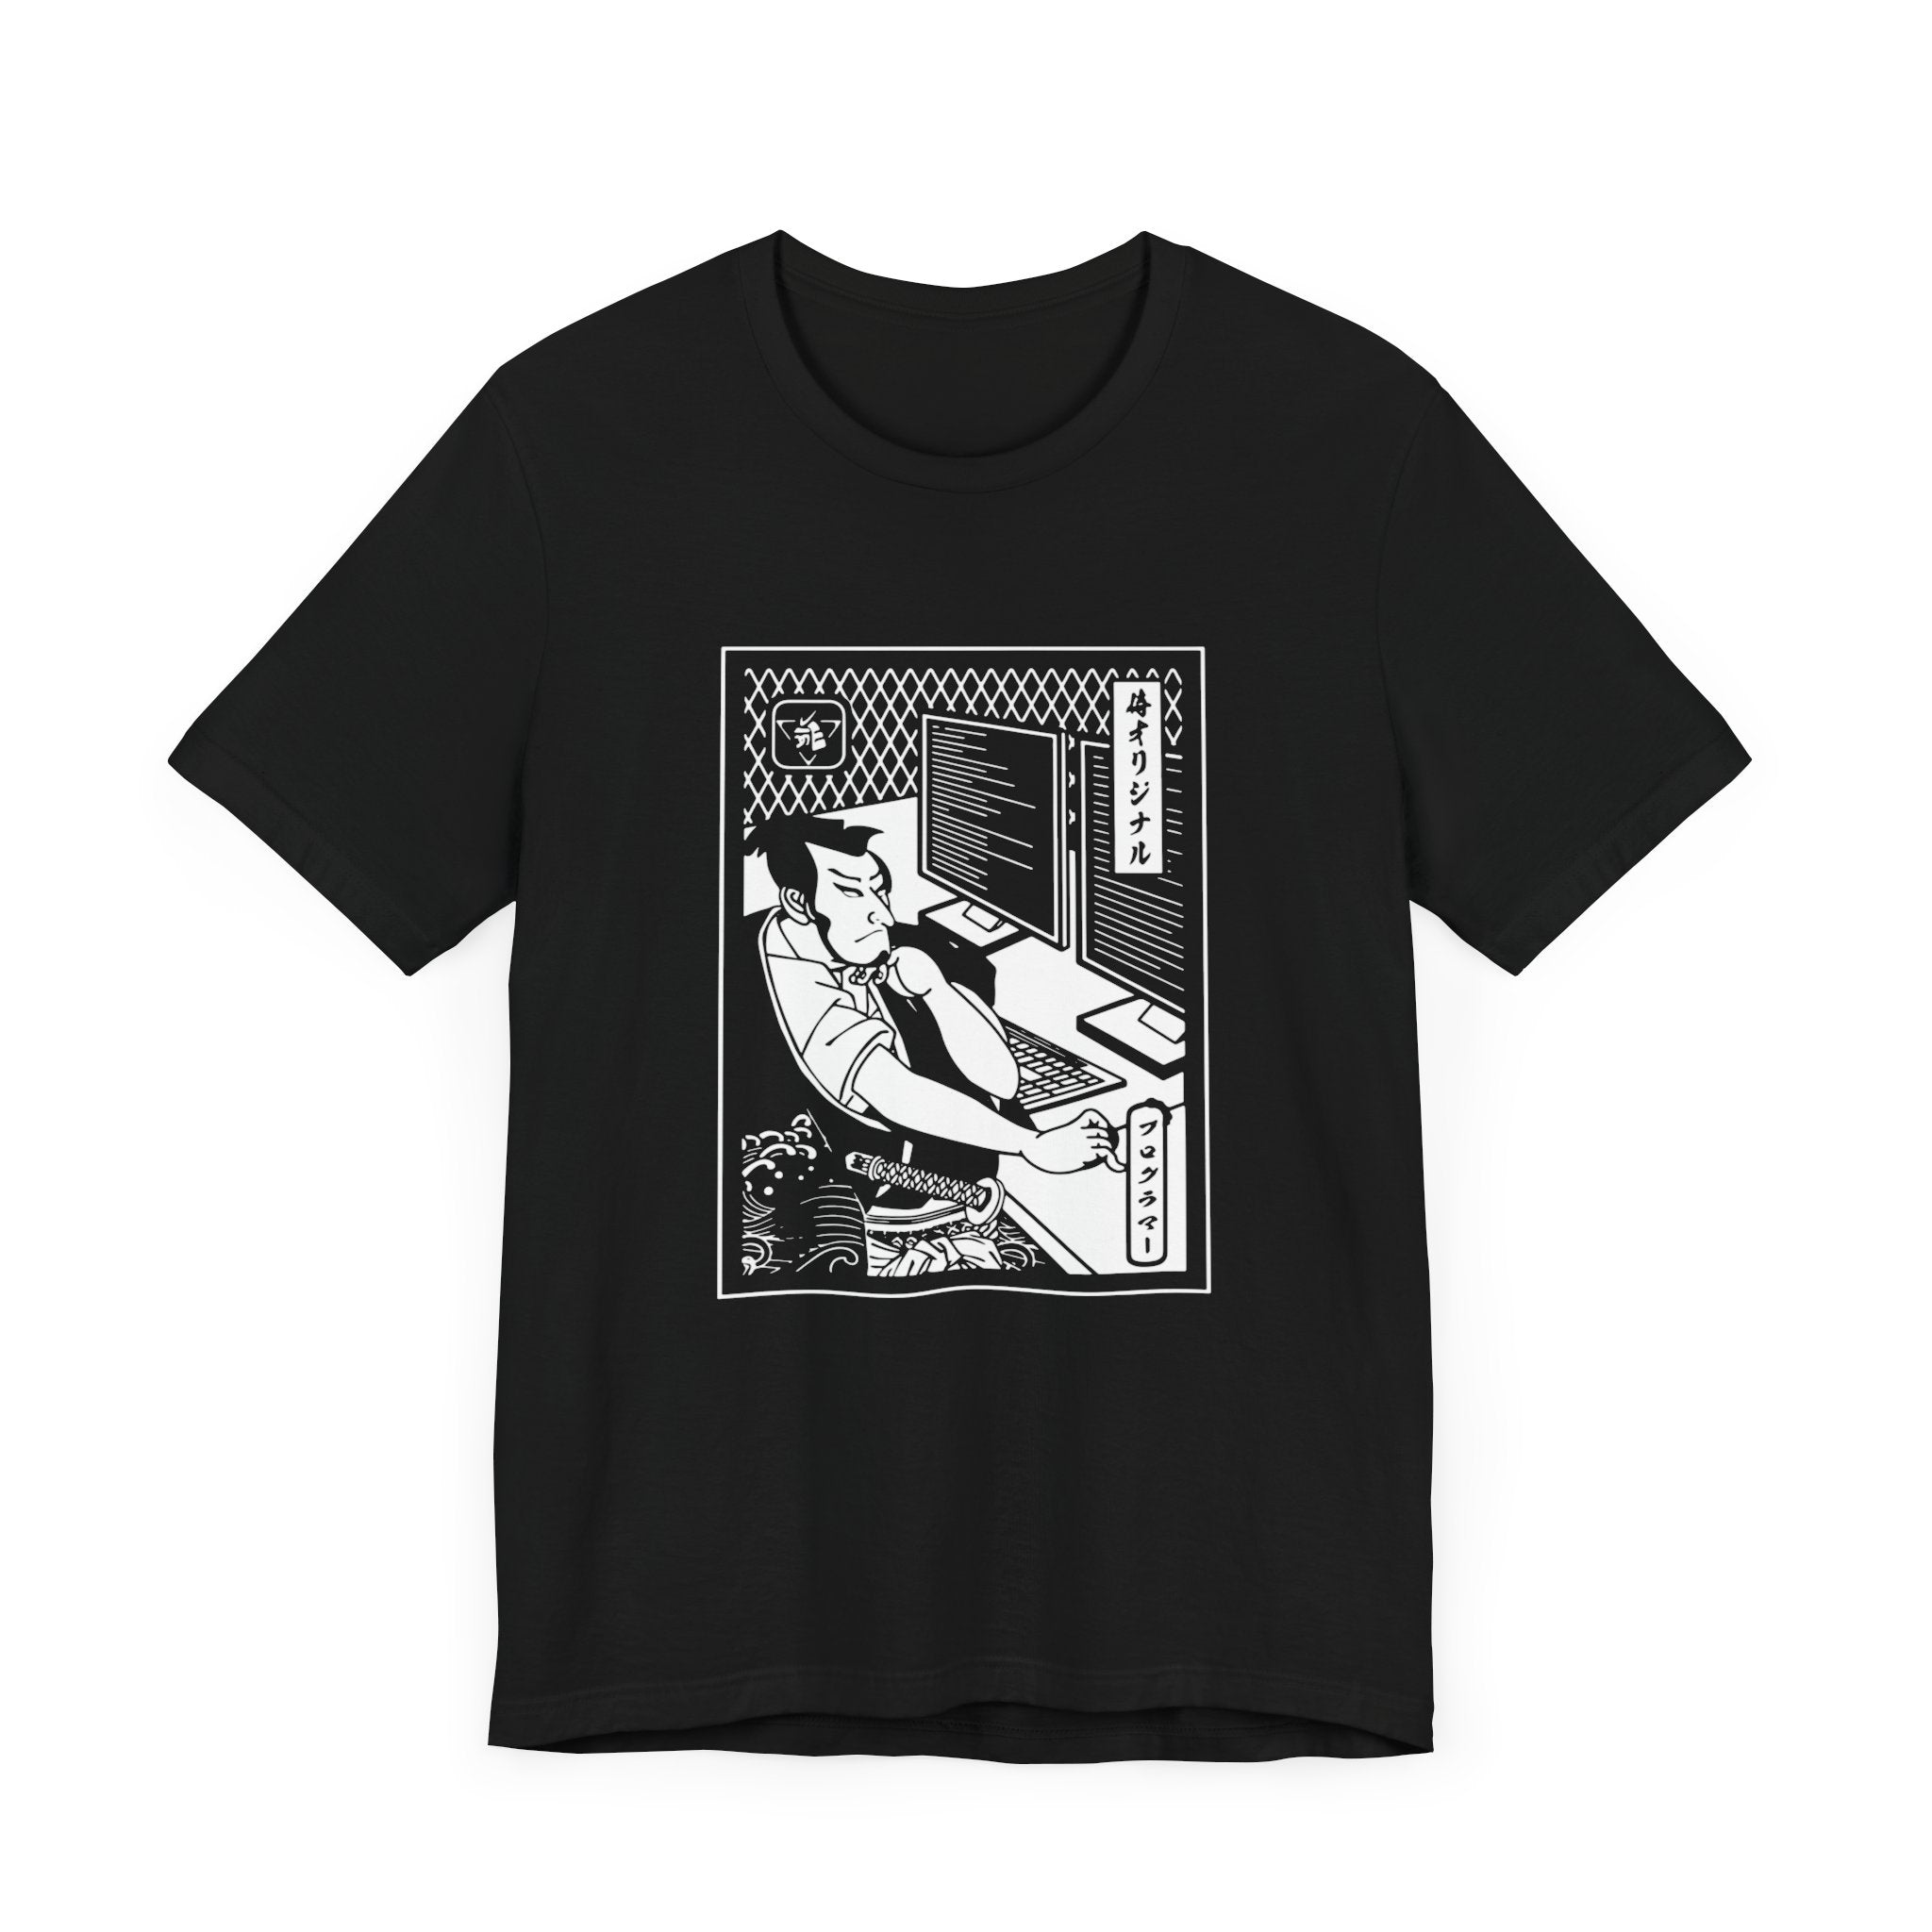 Coding Samurai t-shirt made from breathable fabric, featuring a graphic design of a man sitting at a desk with a computer, books, and a lamp, enclosed in a decorative border.